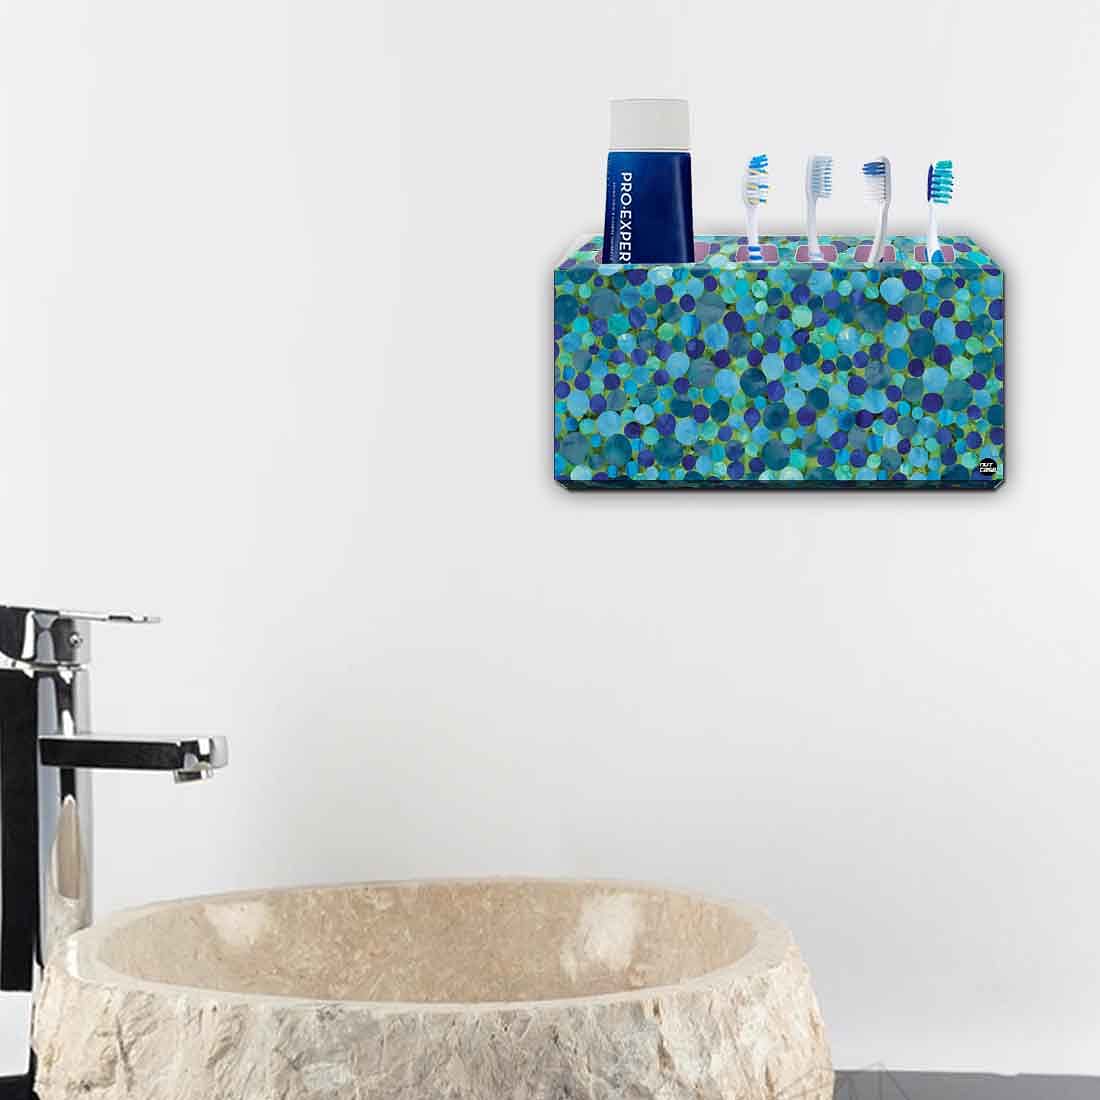 Toothbrush Holder Wall Mounted -Green Colorful Watercolors Nutcase